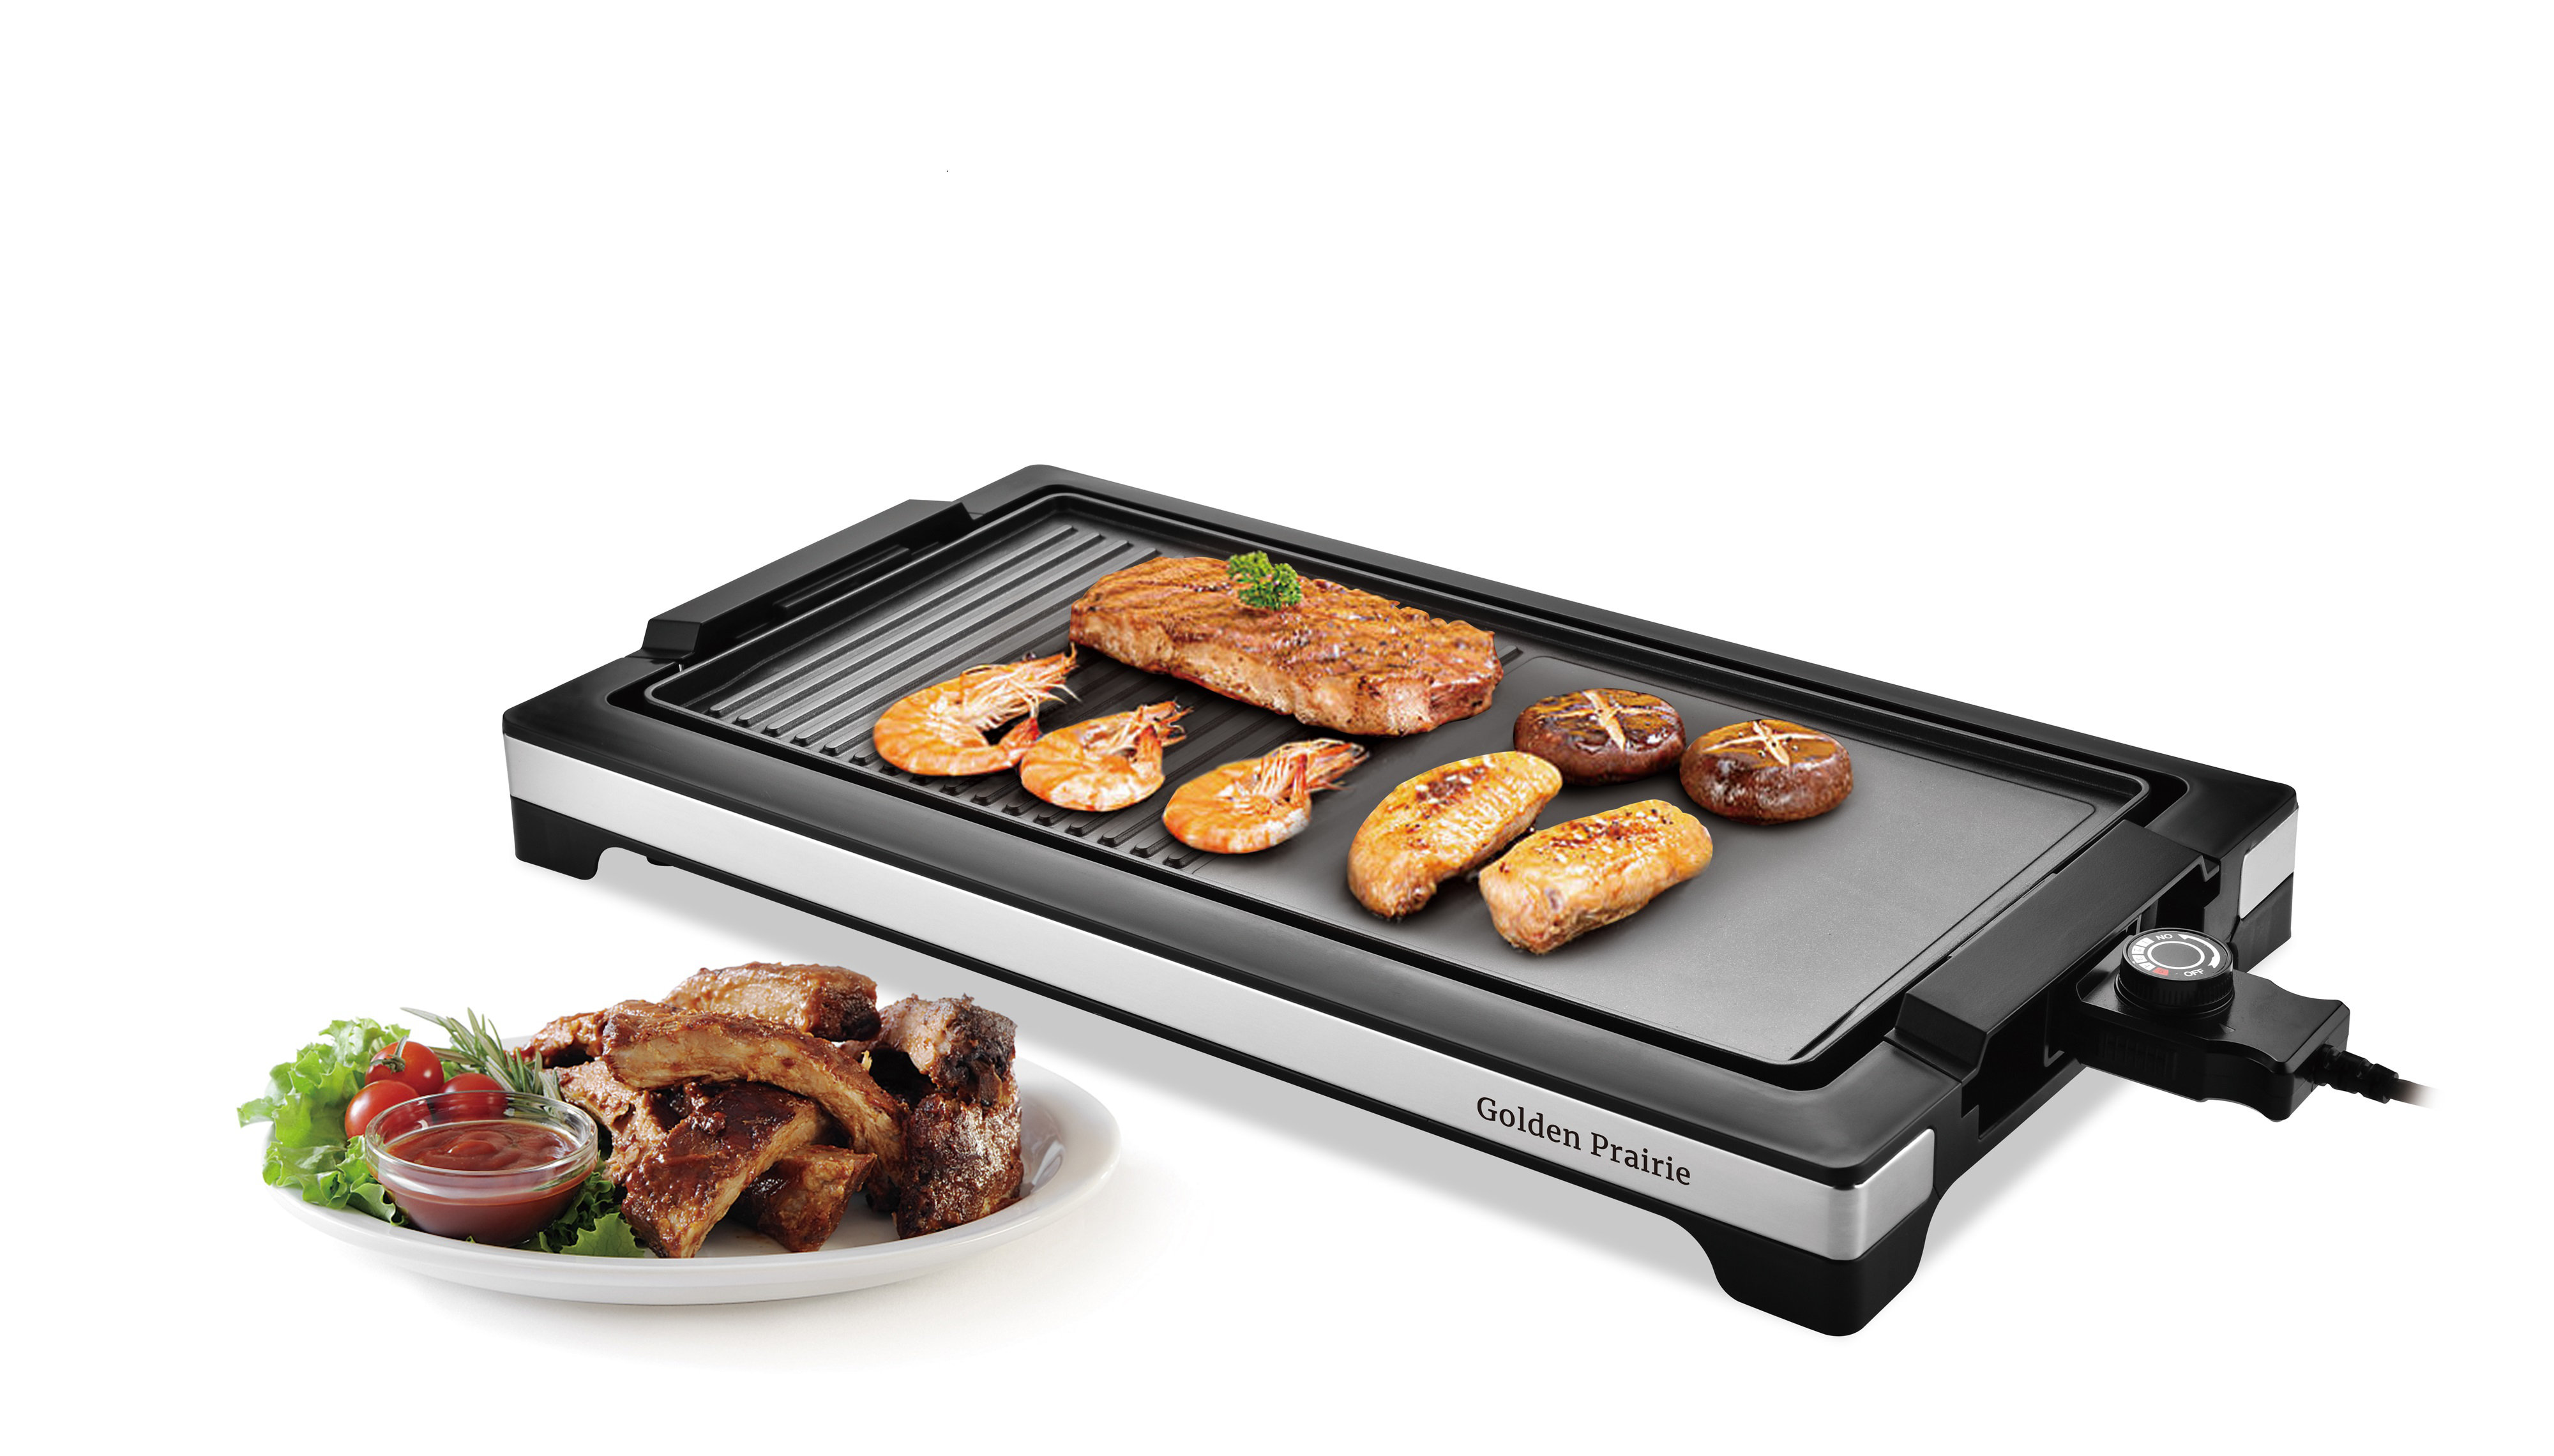 Electric Smokeless Indoor Griddle, 2-in-1 with Lid Grill, 1200W Home w/ Hood BBQ Grill, Nonstick Cooking Plate, 5 Level Adjustable Temperature